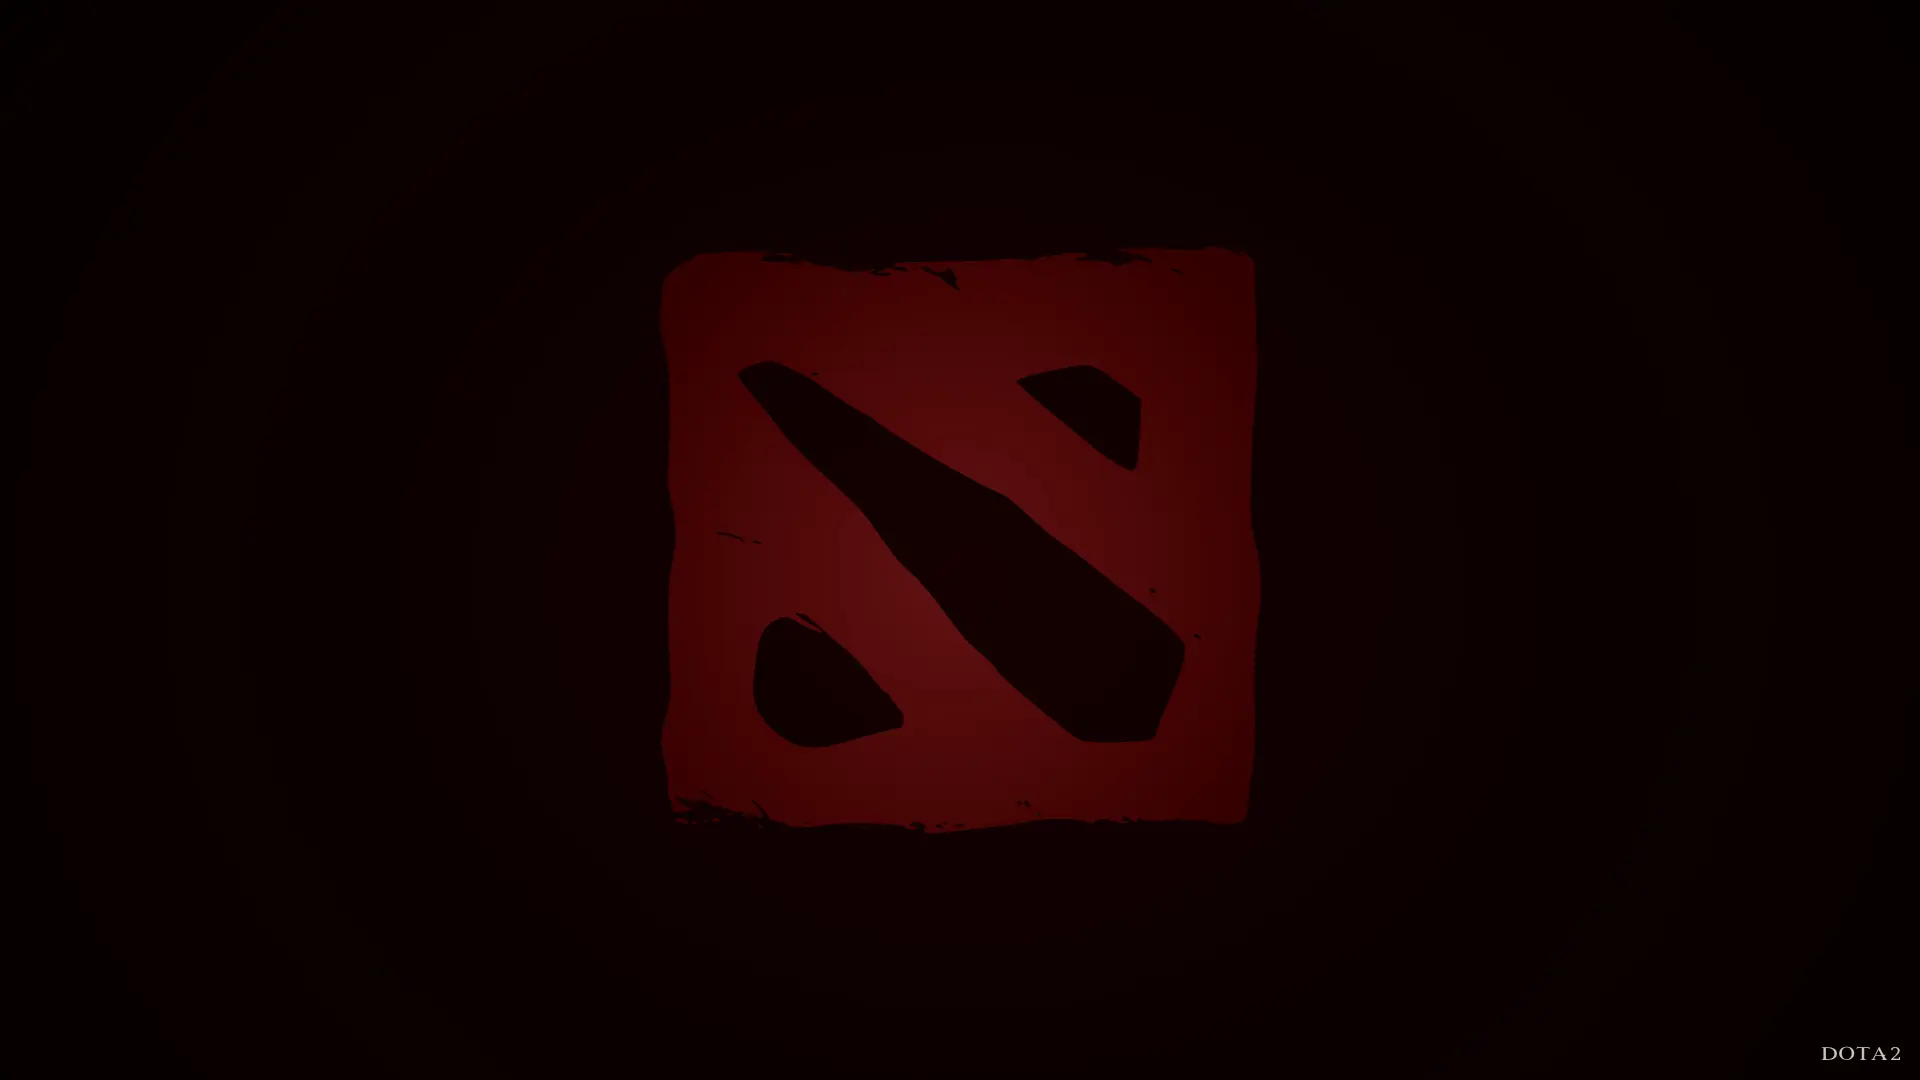 DotA 2 introduces two new heroes